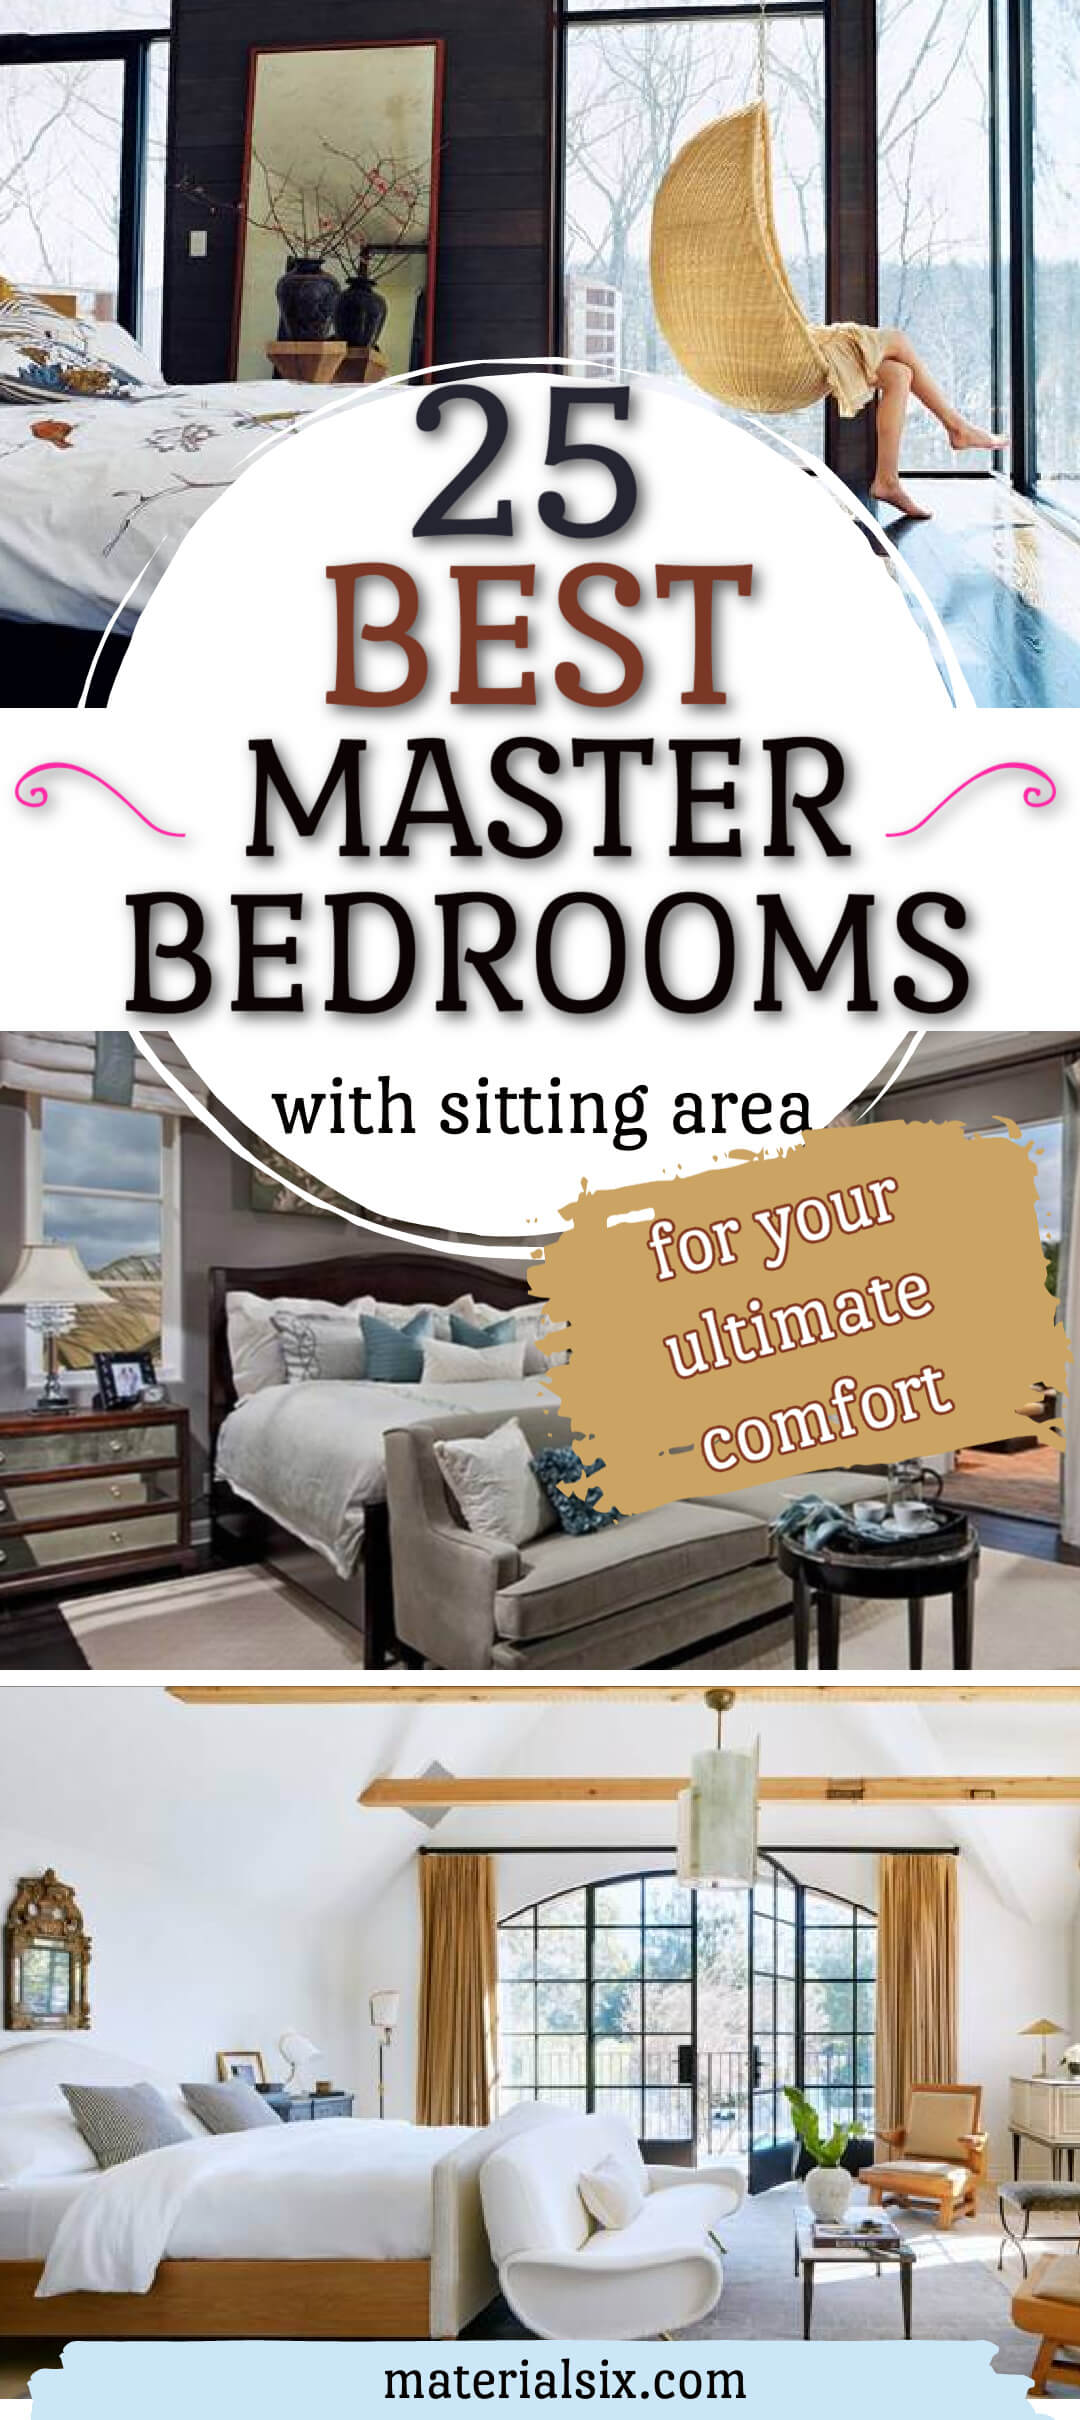 25 Best Master Bedrooms with Sitting Area for Your Ultimate Comfort (1)